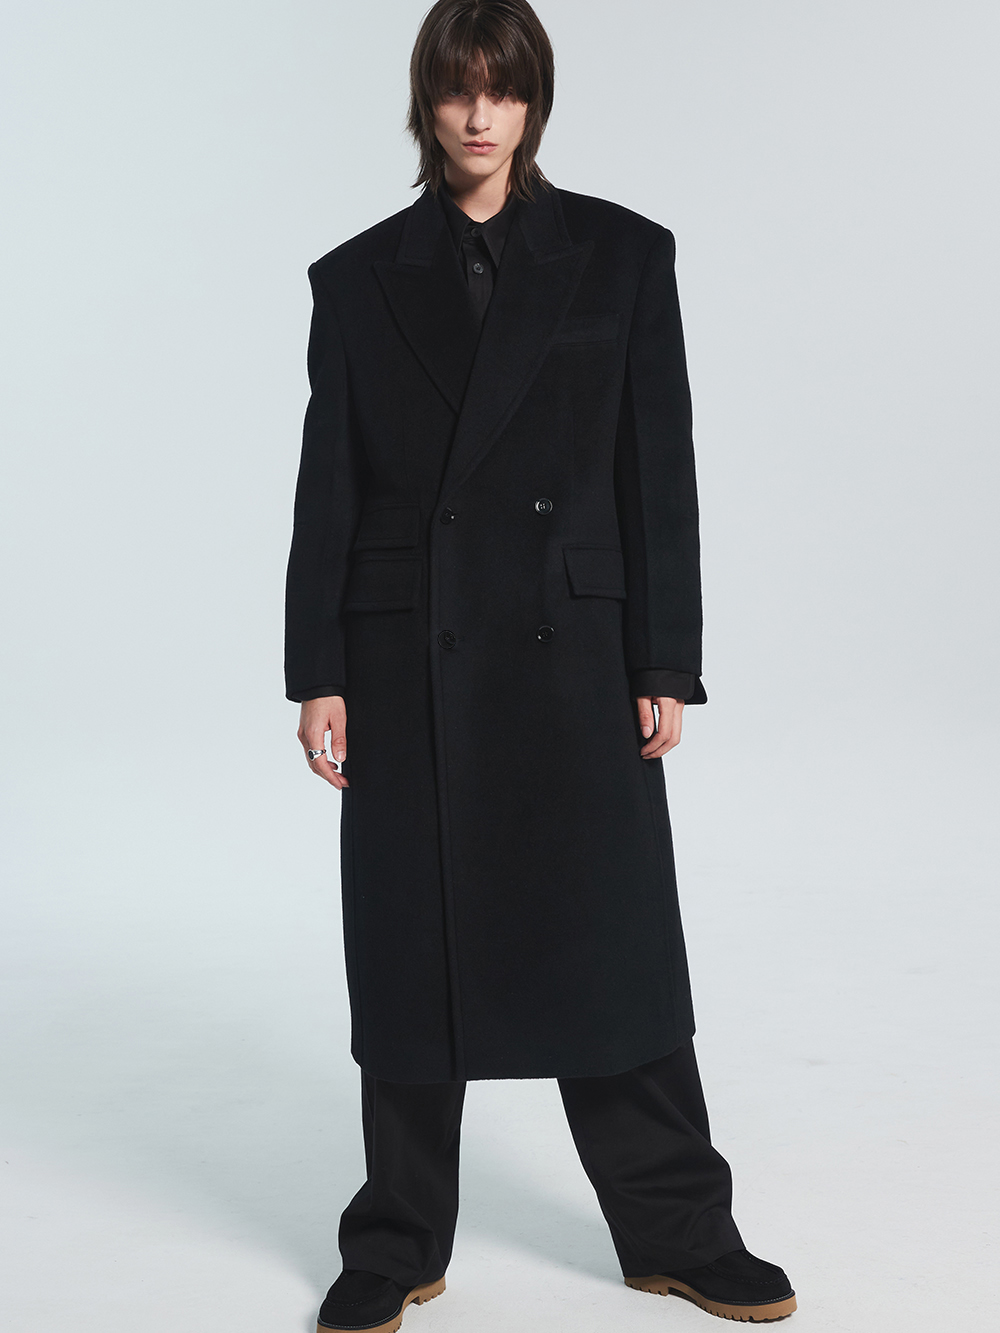 AG DOUBLE BREASTED LONG COAT [BLACK]